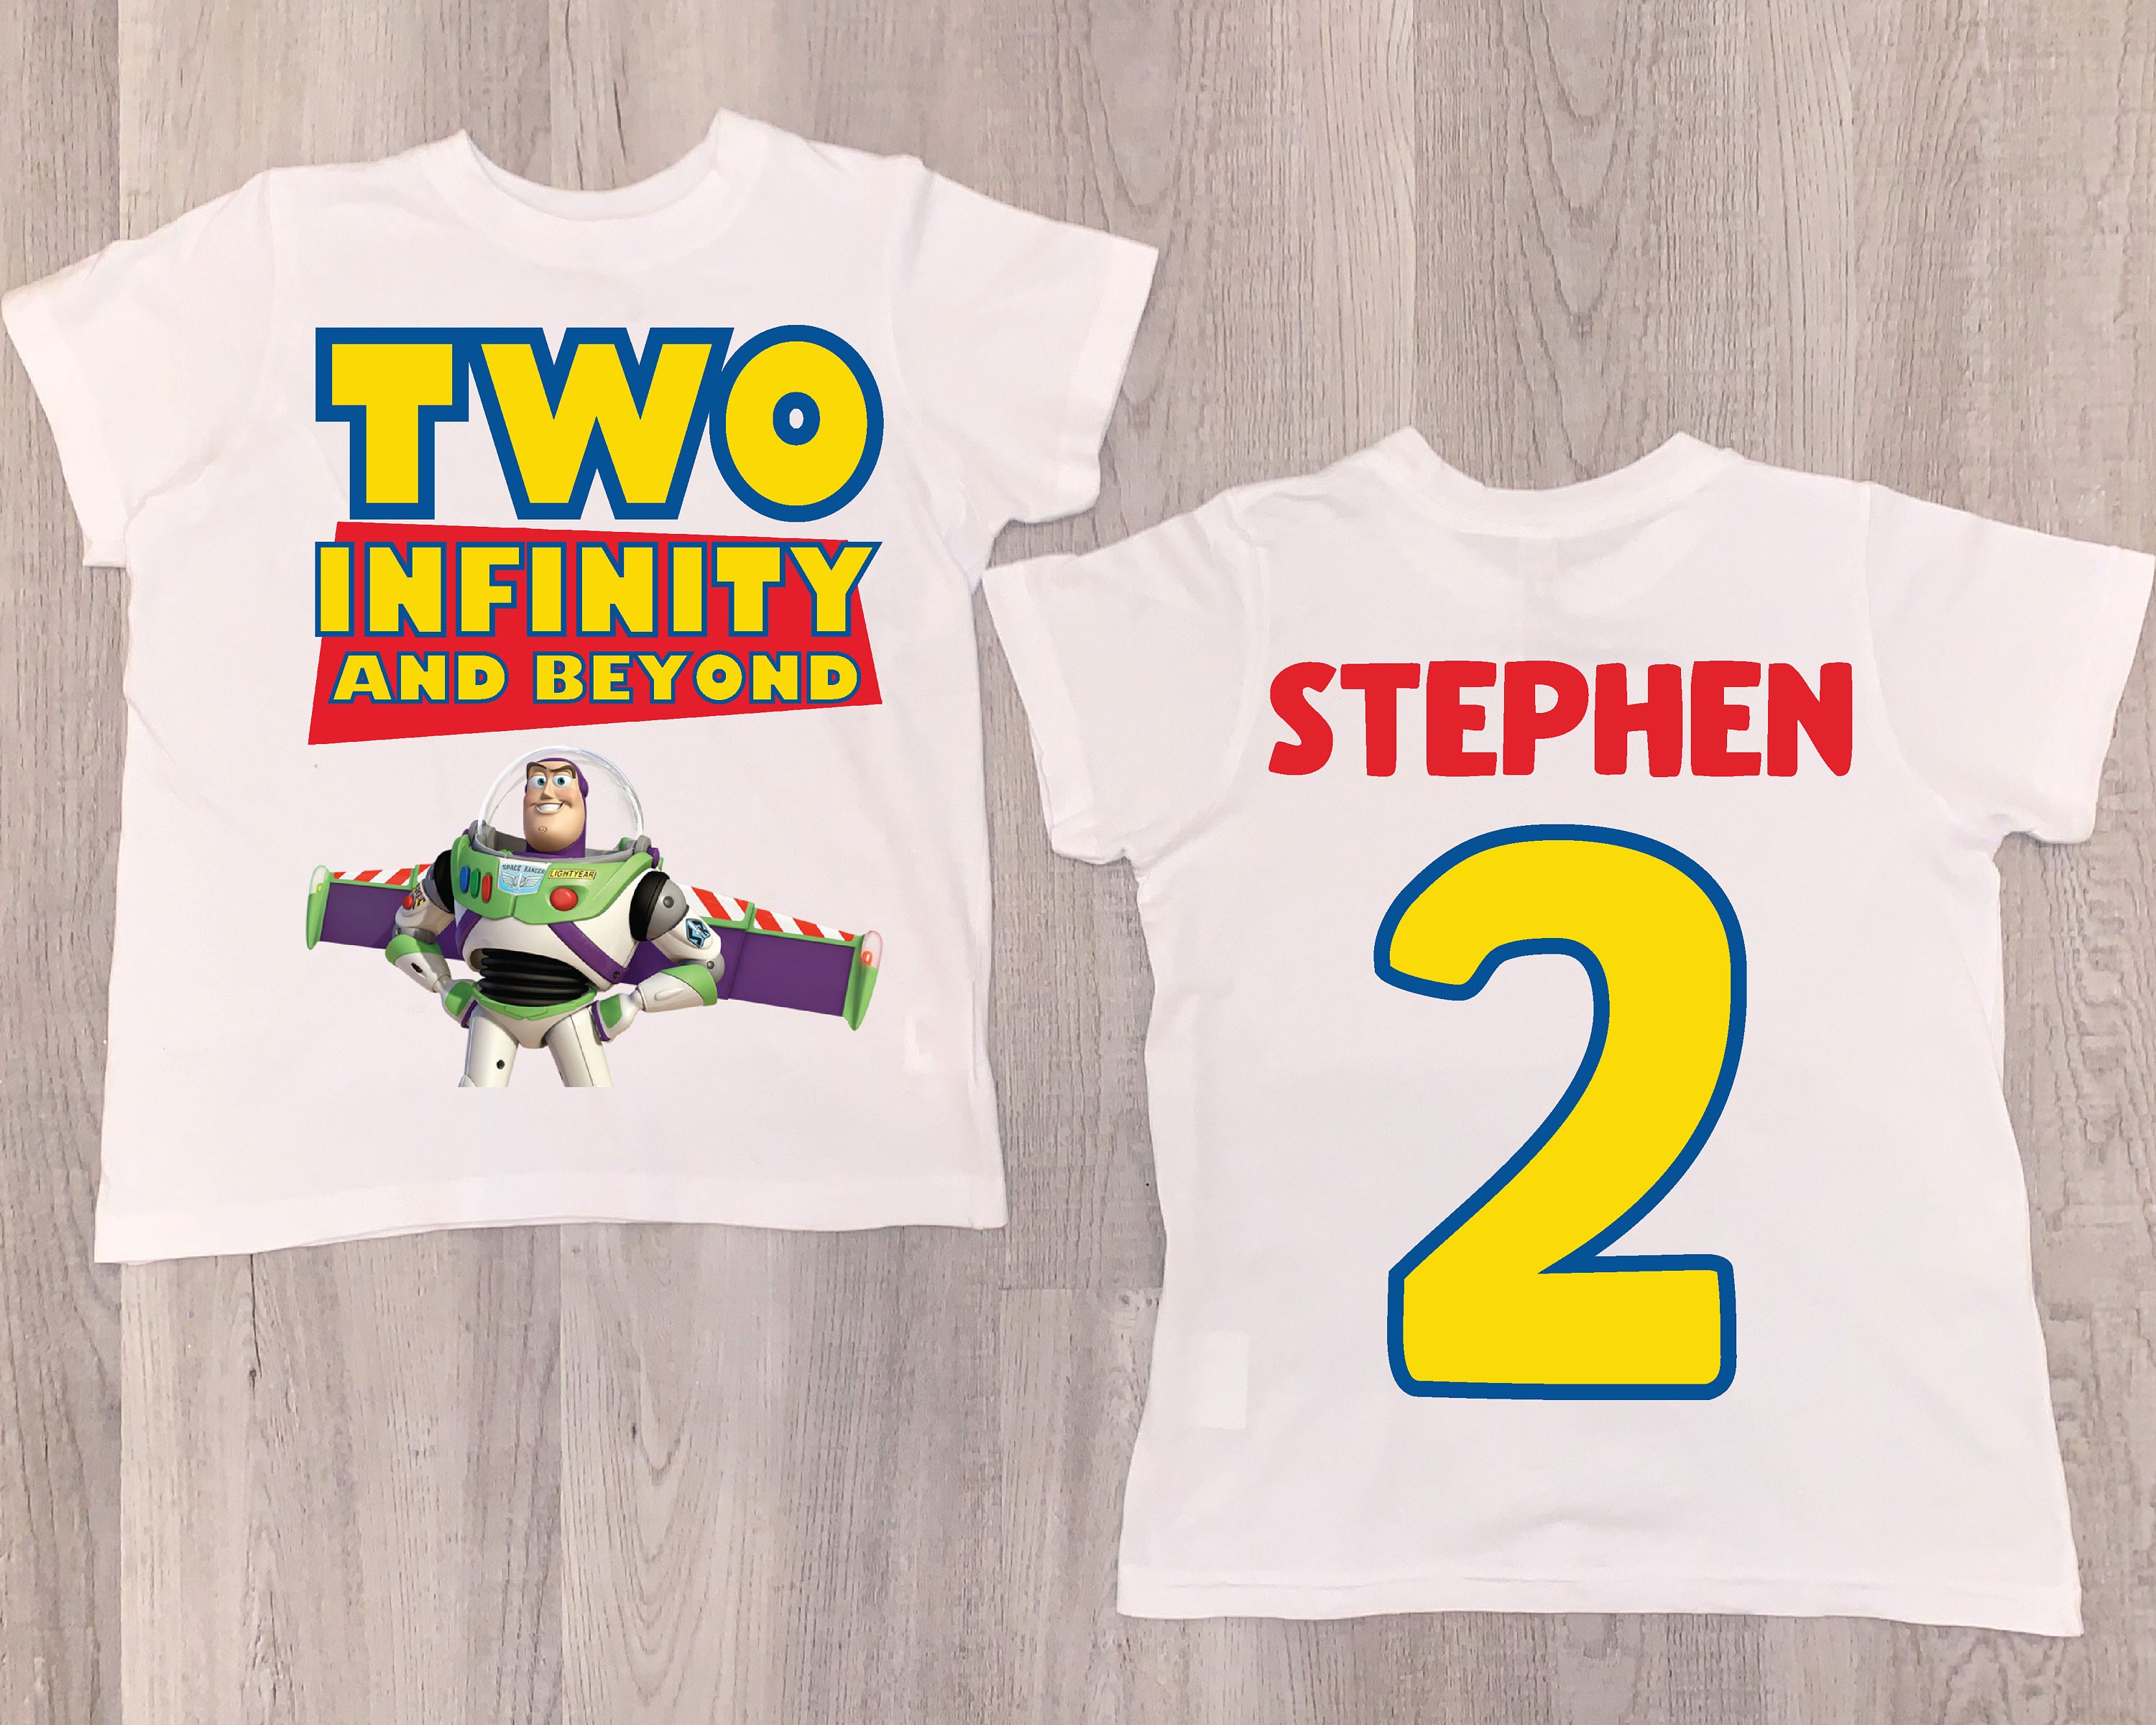 buzz lightyear shirt to infinity and beyond tee toy story shirt toy story birthday shirt 2 infinity and beyond